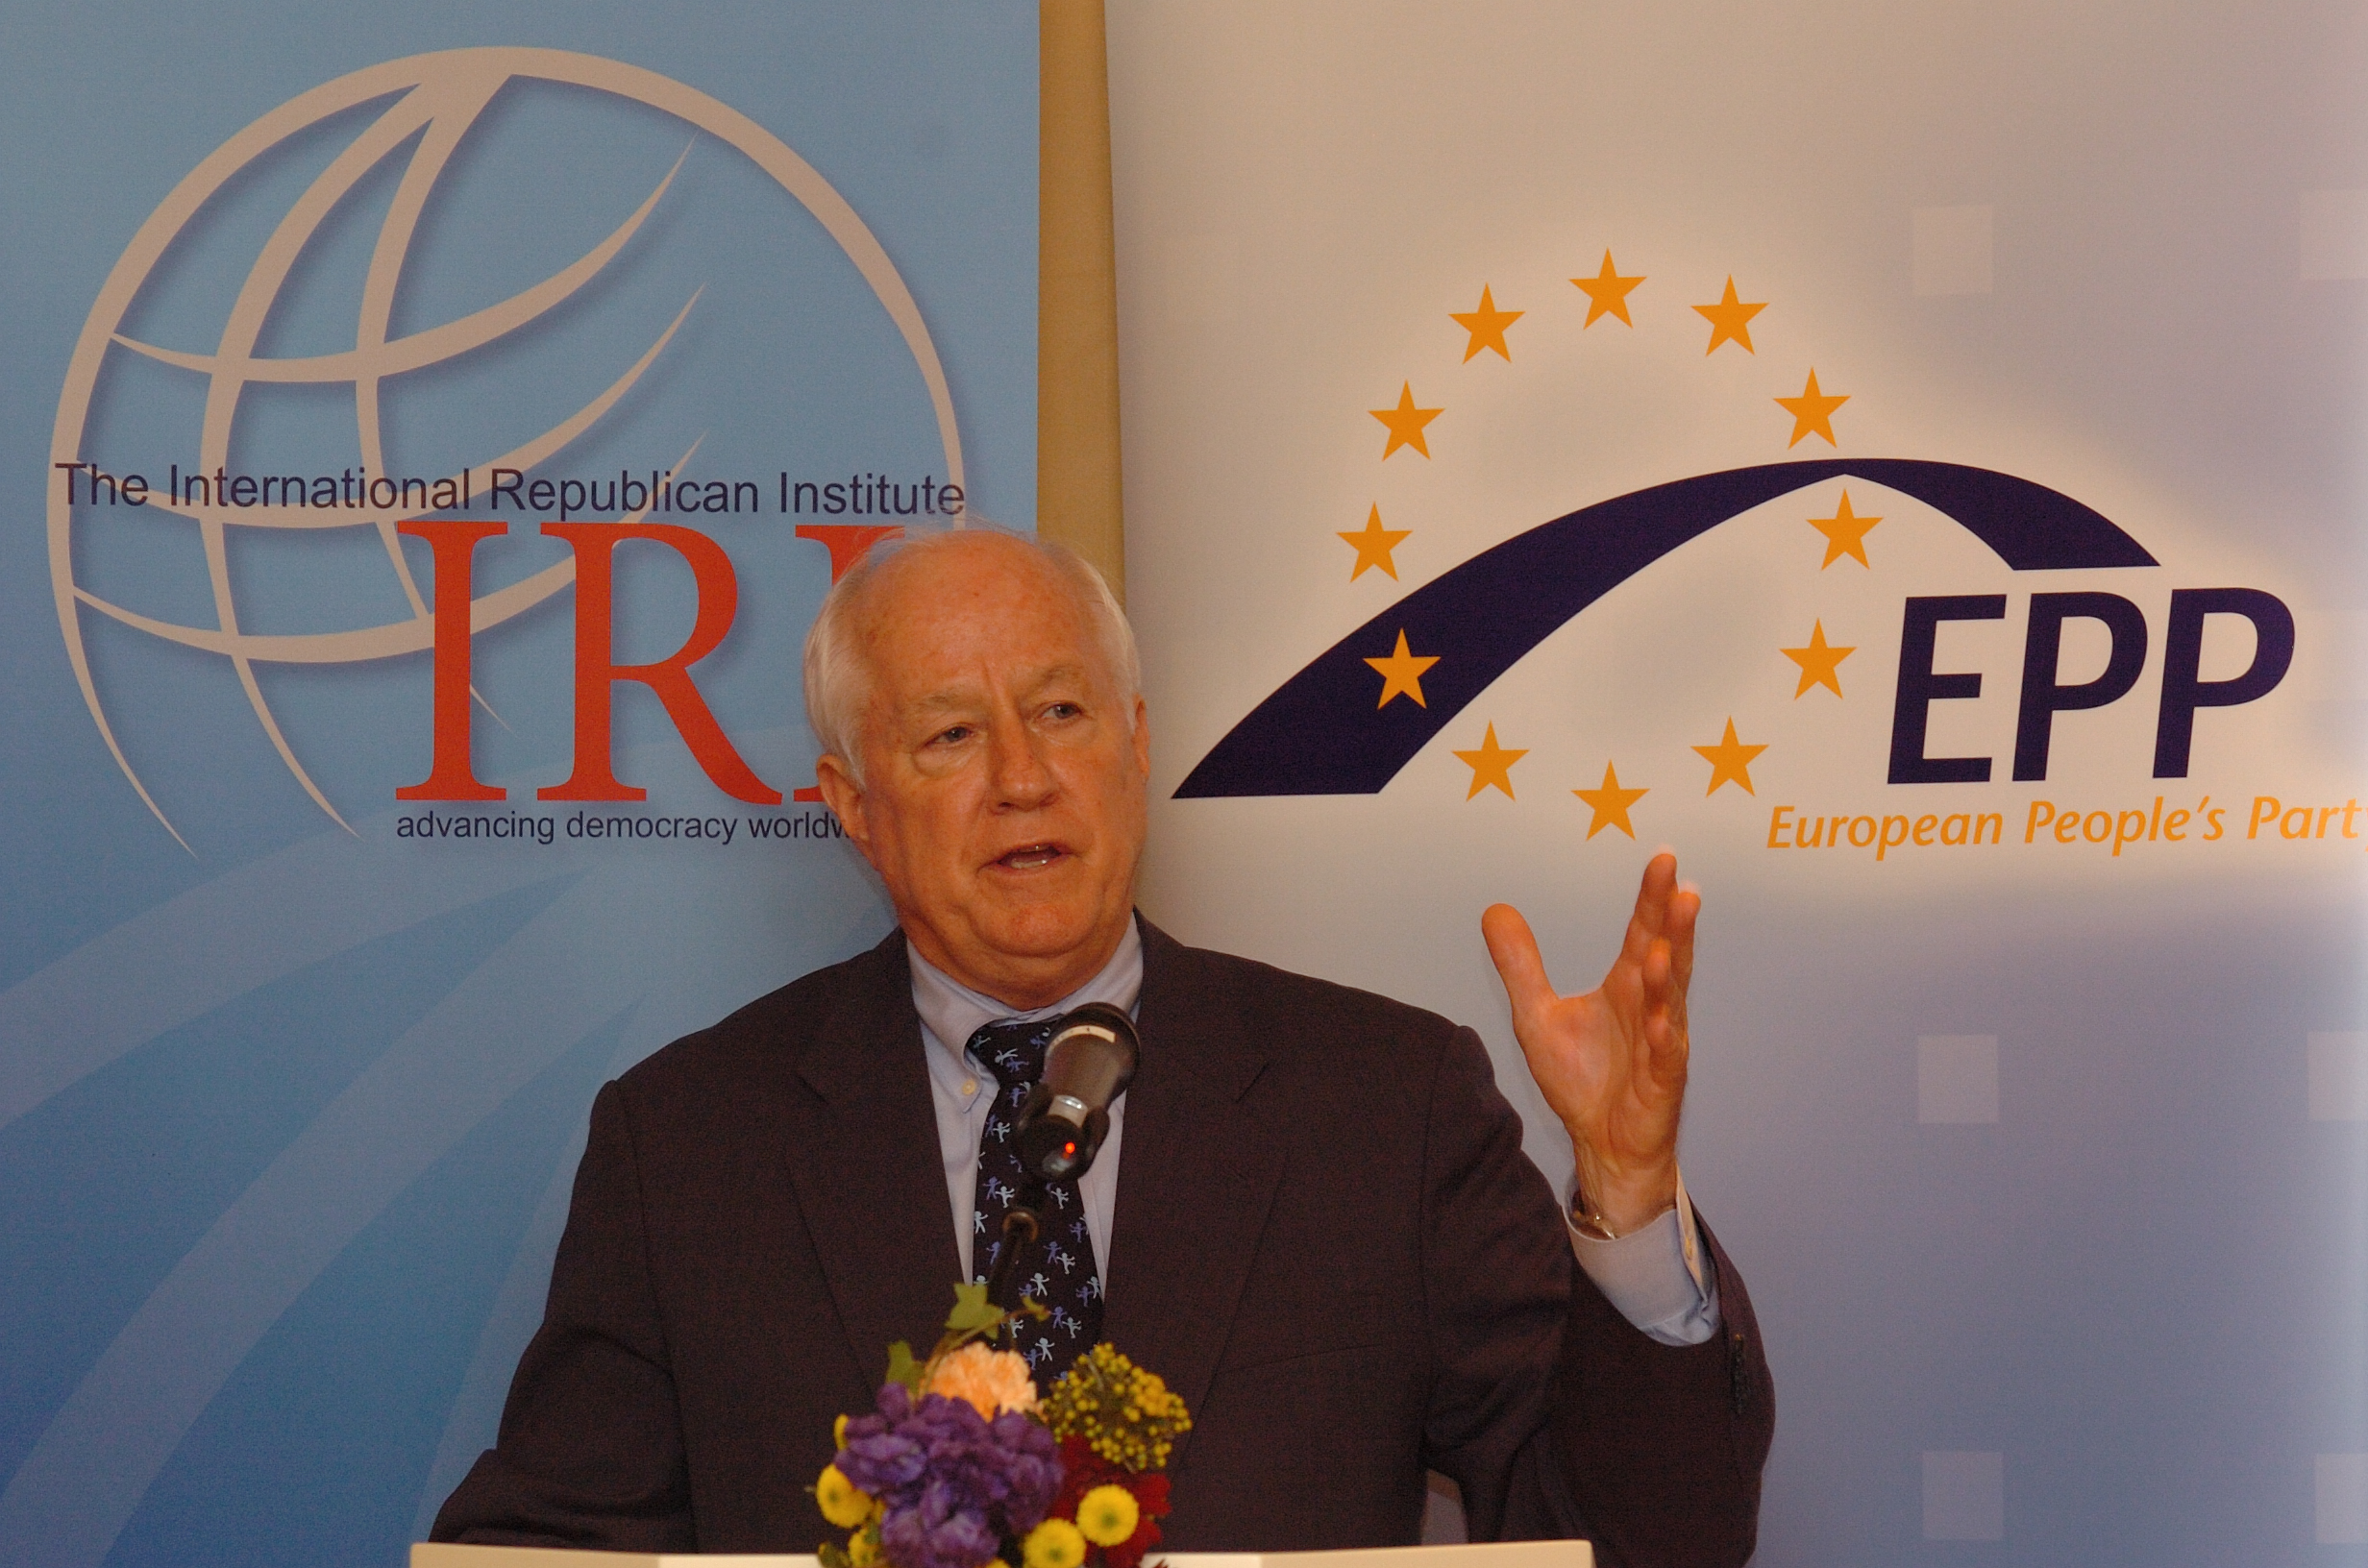 Congressman Kolbe discusses immigration policy in Brussels.